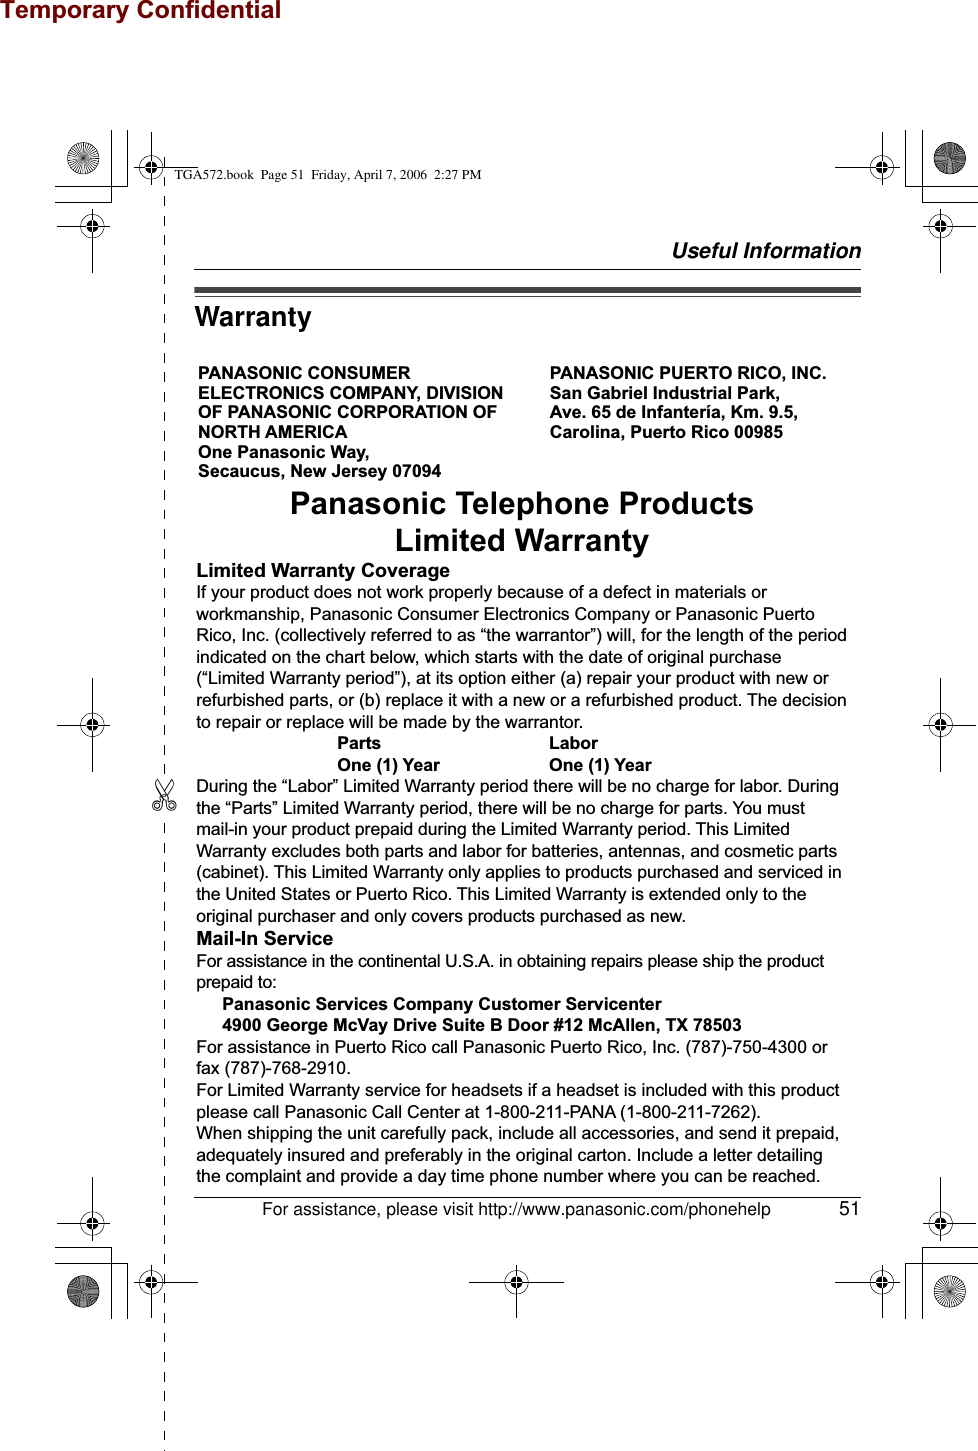 Temporary ConfidentialUseful Information✄For assistance, please visit http://www.panasonic.com/phonehelp 51WarrantyPANASONIC CONSUMER ELECTRONICS COMPANY, DIVISION OF PANASONIC CORPORATION OF NORTH AMERICA One Panasonic Way, Secaucus, New Jersey 07094PANASONIC PUERTO RICO, INC.San Gabriel Industrial Park, Ave. 65 de Infantería, Km. 9.5,Carolina, Puerto Rico 00985Panasonic Telephone ProductsLimited WarrantyLimited Warranty CoverageIf your product does not work properly because of a defect in materials or workmanship, Panasonic Consumer Electronics Company or Panasonic Puerto Rico, Inc. (collectively referred to as “the warrantor”) will, for the length of the period indicated on the chart below, which starts with the date of original purchase (“Limited Warranty period”), at its option either (a) repair your product with new or refurbished parts, or (b) replace it with a new or a refurbished product. The decision to repair or replace will be made by the warrantor.     Parts       Labor     One (1) Year    One (1) YearDuring the “Labor” Limited Warranty period there will be no charge for labor. During the “Parts” Limited Warranty period, there will be no charge for parts. You must mail-in your product prepaid during the Limited Warranty period. This Limited Warranty excludes both parts and labor for batteries, antennas, and cosmetic parts (cabinet). This Limited Warranty only applies to products purchased and serviced in the United States or Puerto Rico. This Limited Warranty is extended only to the original purchaser and only covers products purchased as new.Mail-In ServiceFor assistance in the continental U.S.A. in obtaining repairs please ship the product prepaid to:  Panasonic Services Company Customer Servicenter  4900 George McVay Drive Suite B Door #12 McAllen, TX 78503For assistance in Puerto Rico call Panasonic Puerto Rico, Inc. (787)-750-4300 or fax (787)-768-2910.For Limited Warranty service for headsets if a headset is included with this product please call Panasonic Call Center at 1-800-211-PANA (1-800-211-7262).When shipping the unit carefully pack, include all accessories, and send it prepaid, adequately insured and preferably in the original carton. Include a letter detailing the complaint and provide a day time phone number where you can be reached.TGA572.book  Page 51  Friday, April 7, 2006  2:27 PM